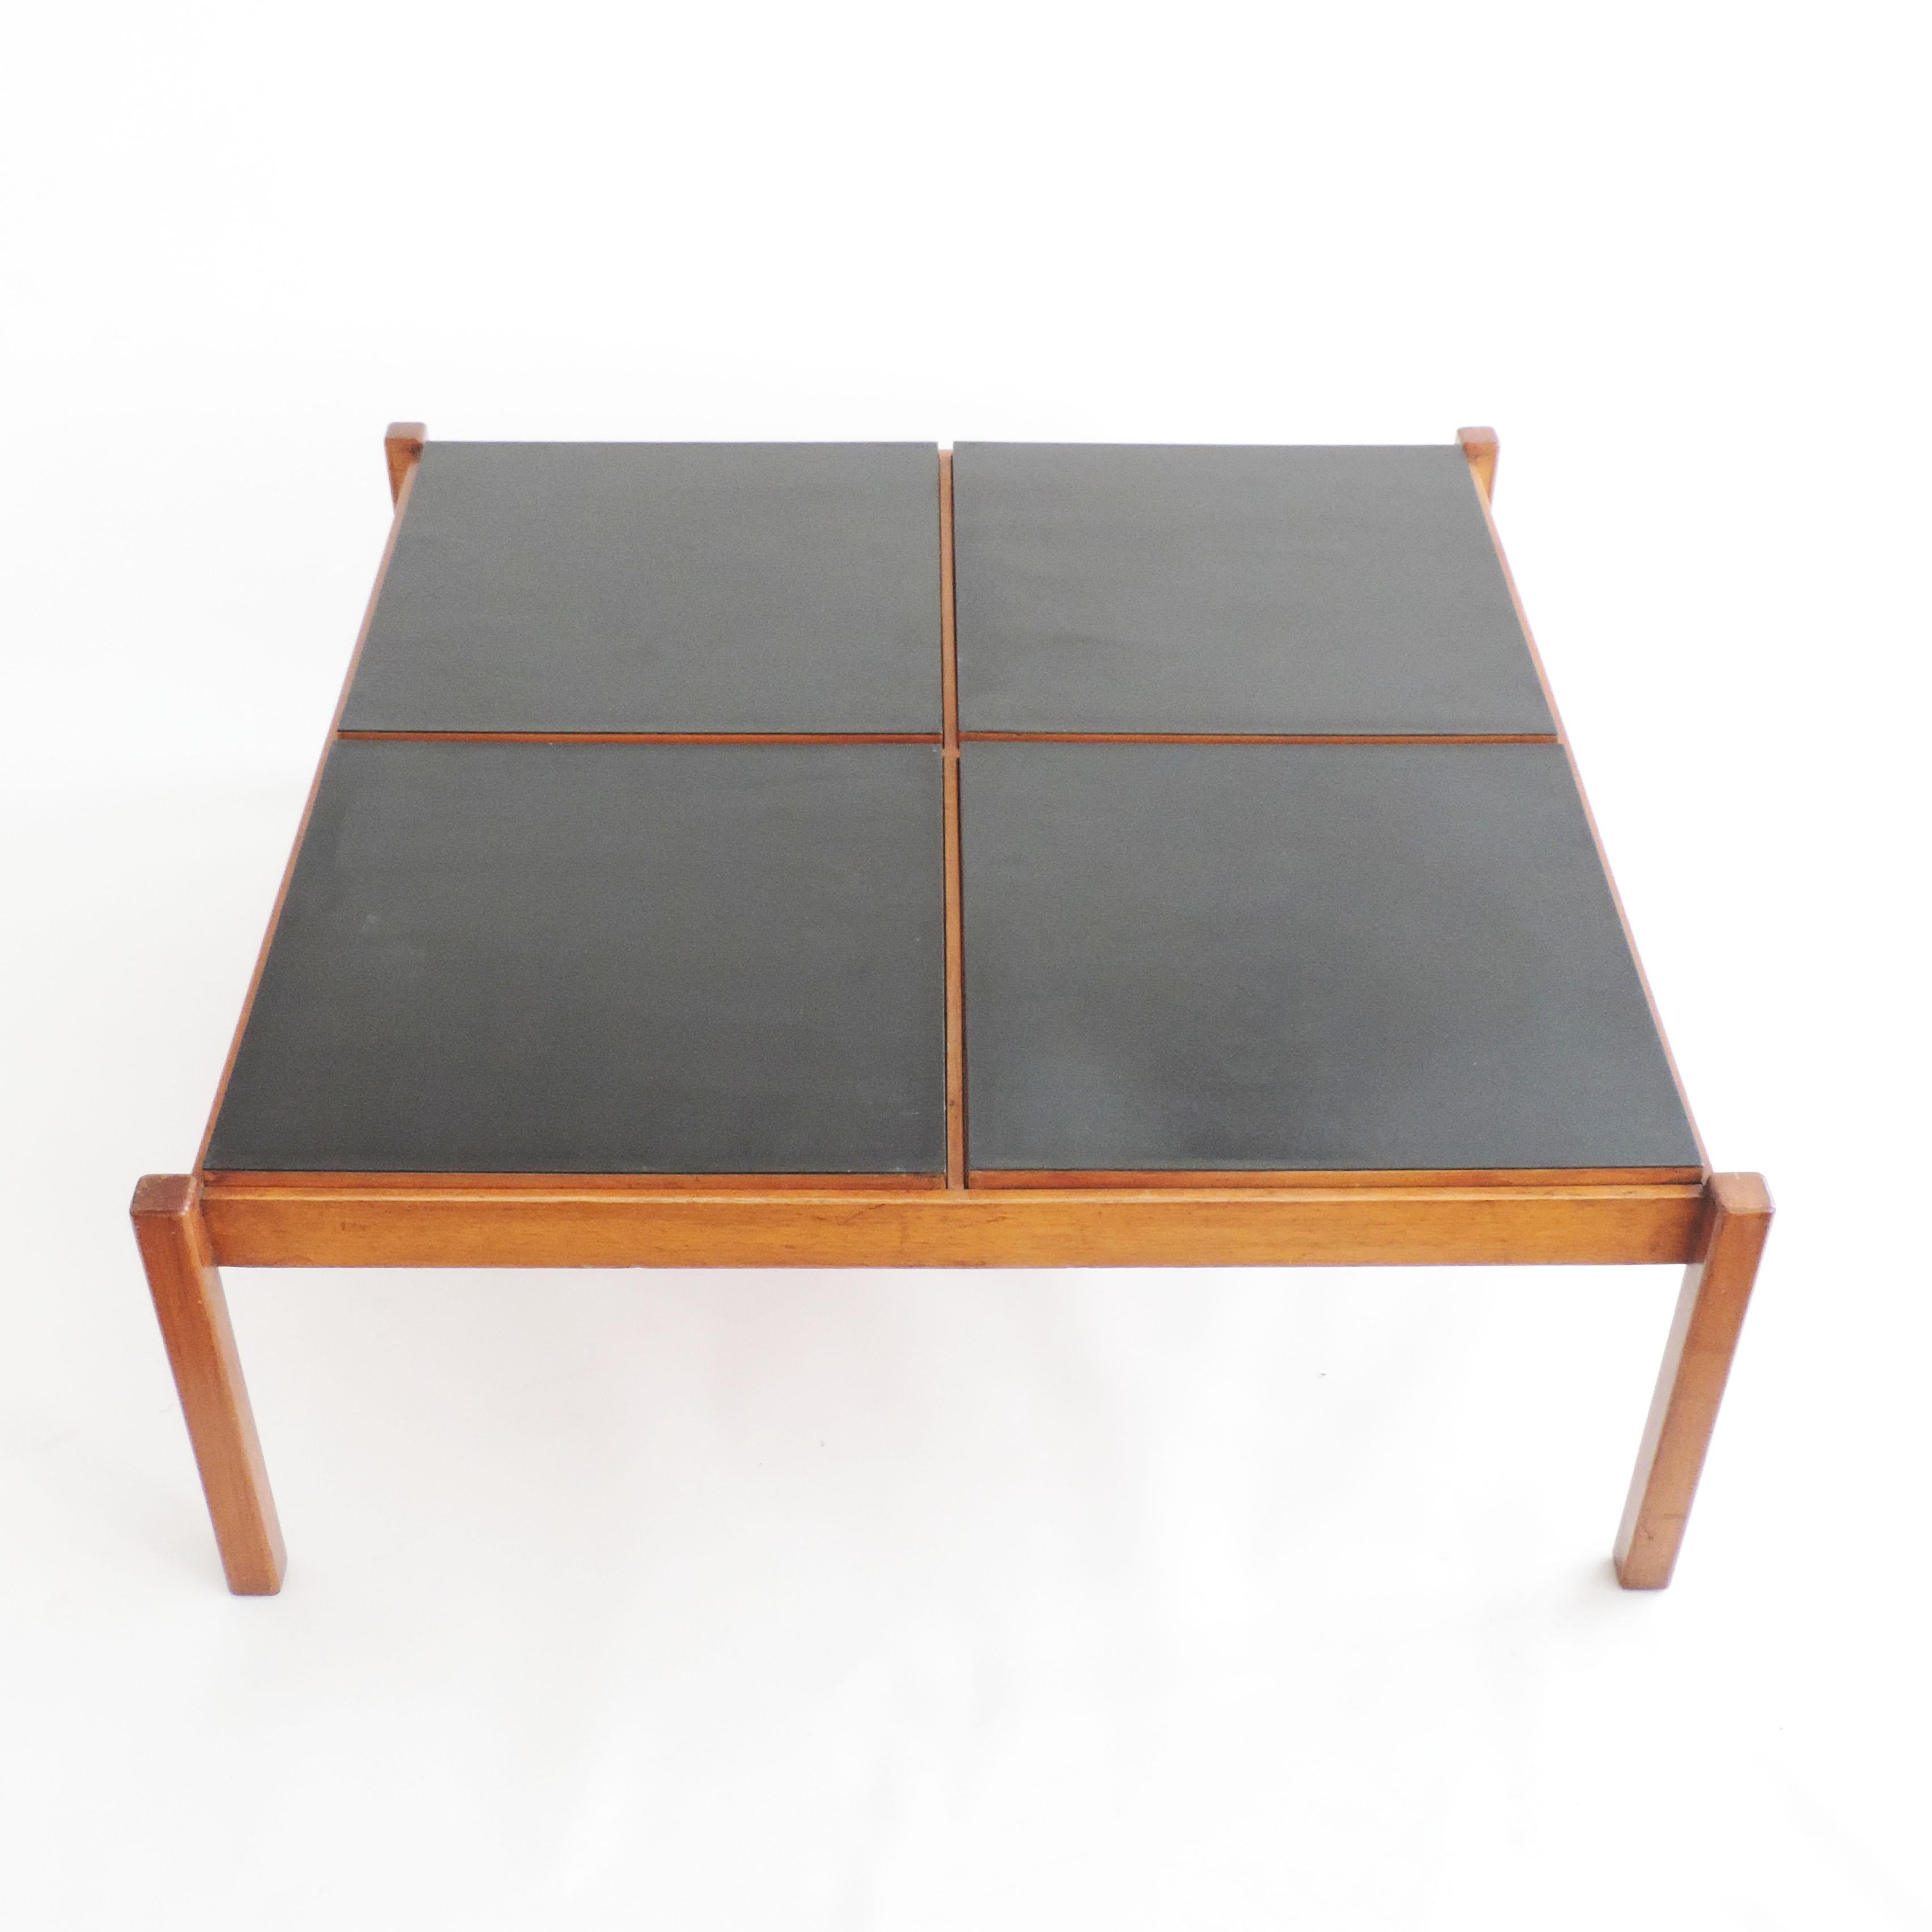 Rare variation by Architect Gianfranco Frattini coffee table for Cantieri Carugati, Italy, 1950s
Interchangeable squares in wood and black are movable as one wishes to create different effects.